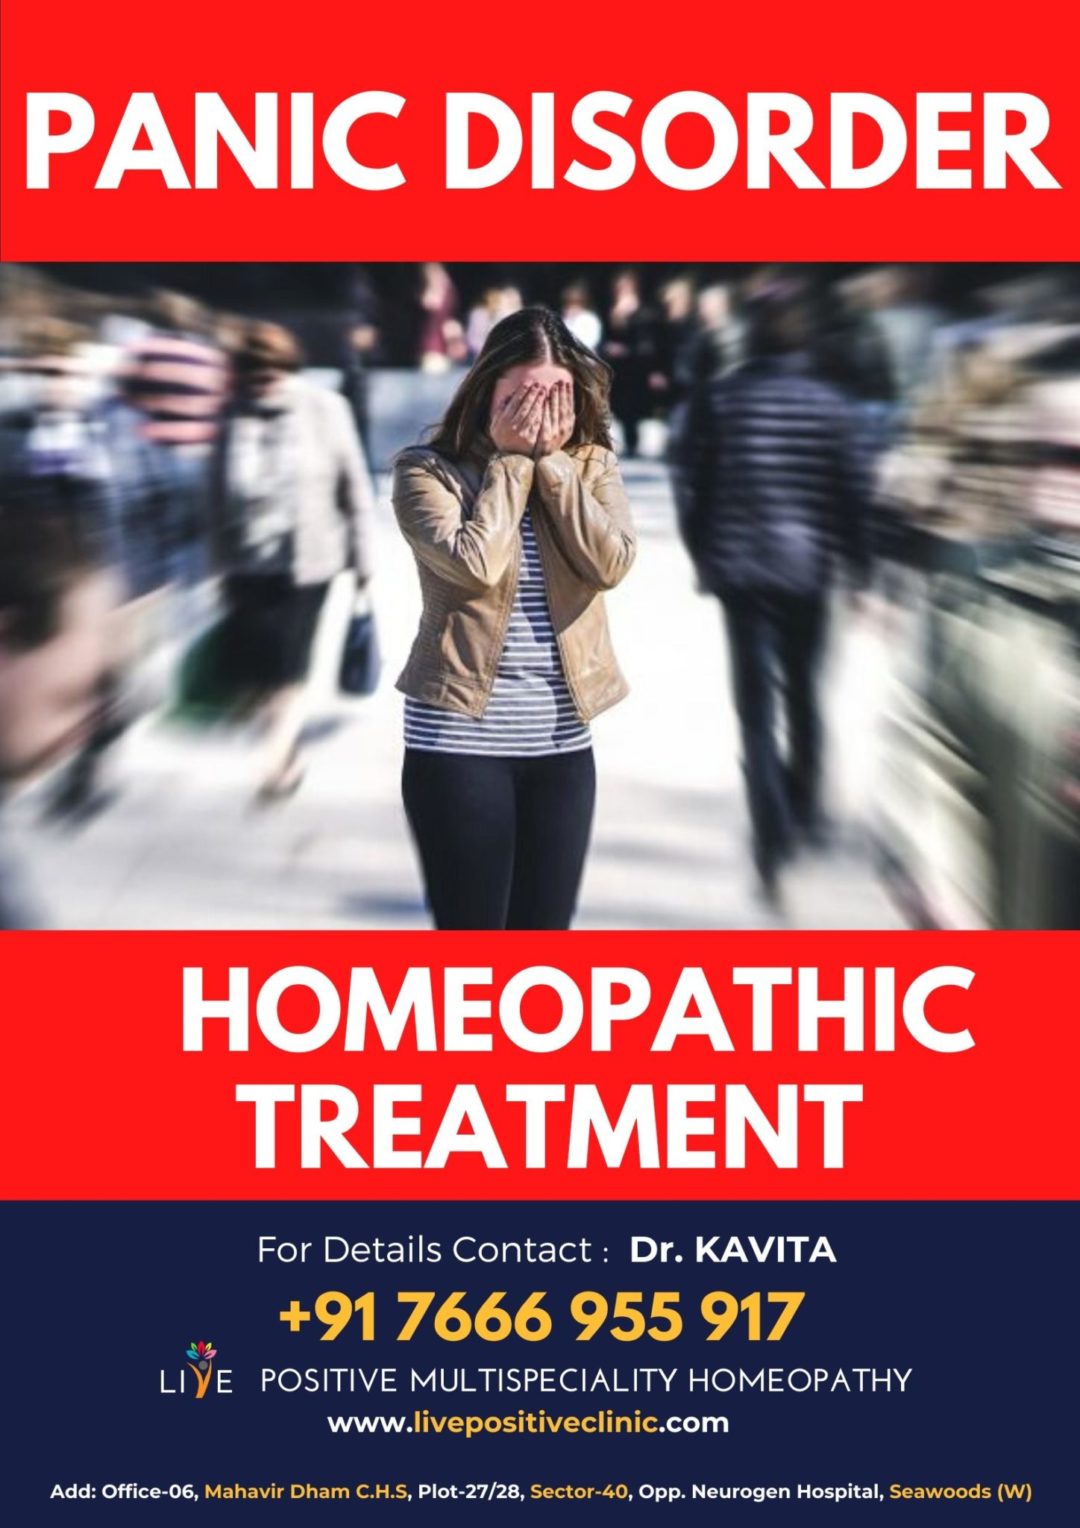 "panic disorder treatment in homeopathy"